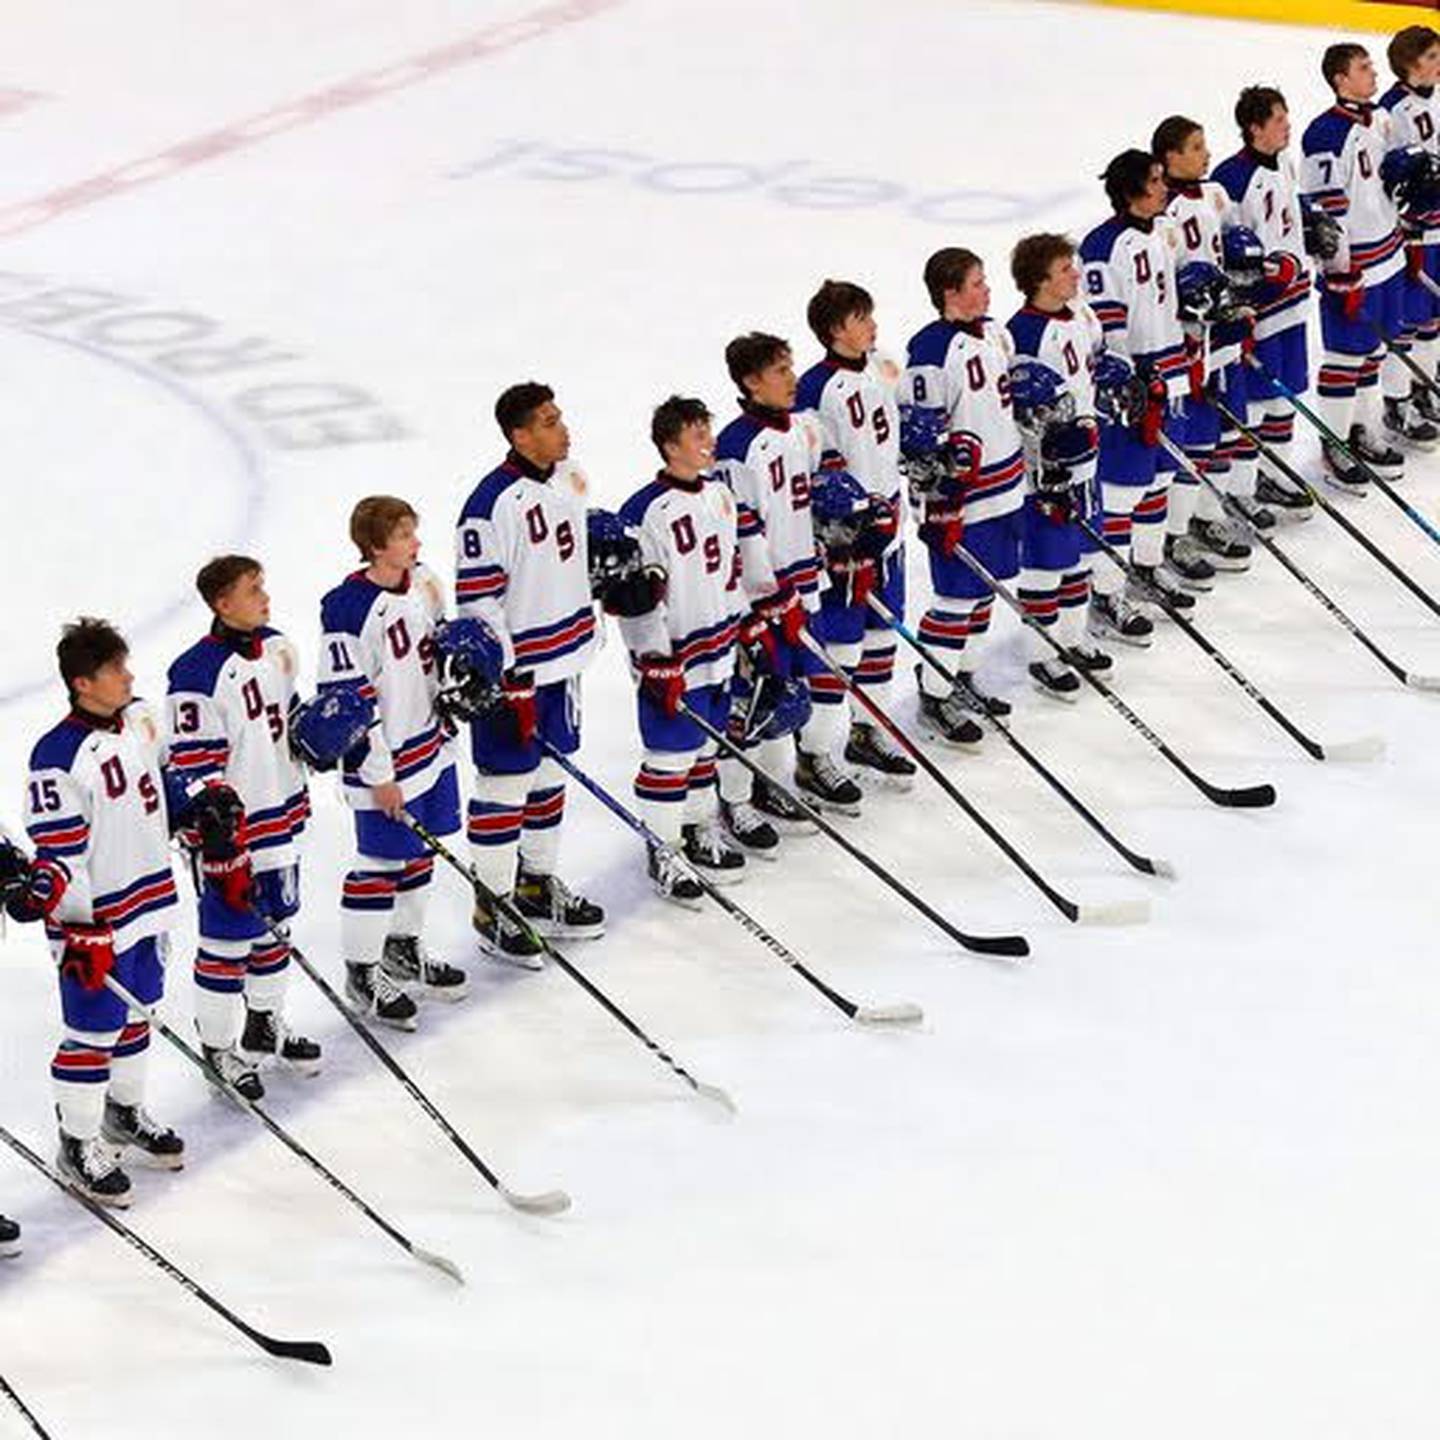 Team USA lines up before a match at the Under-17 Five Nations Tournament